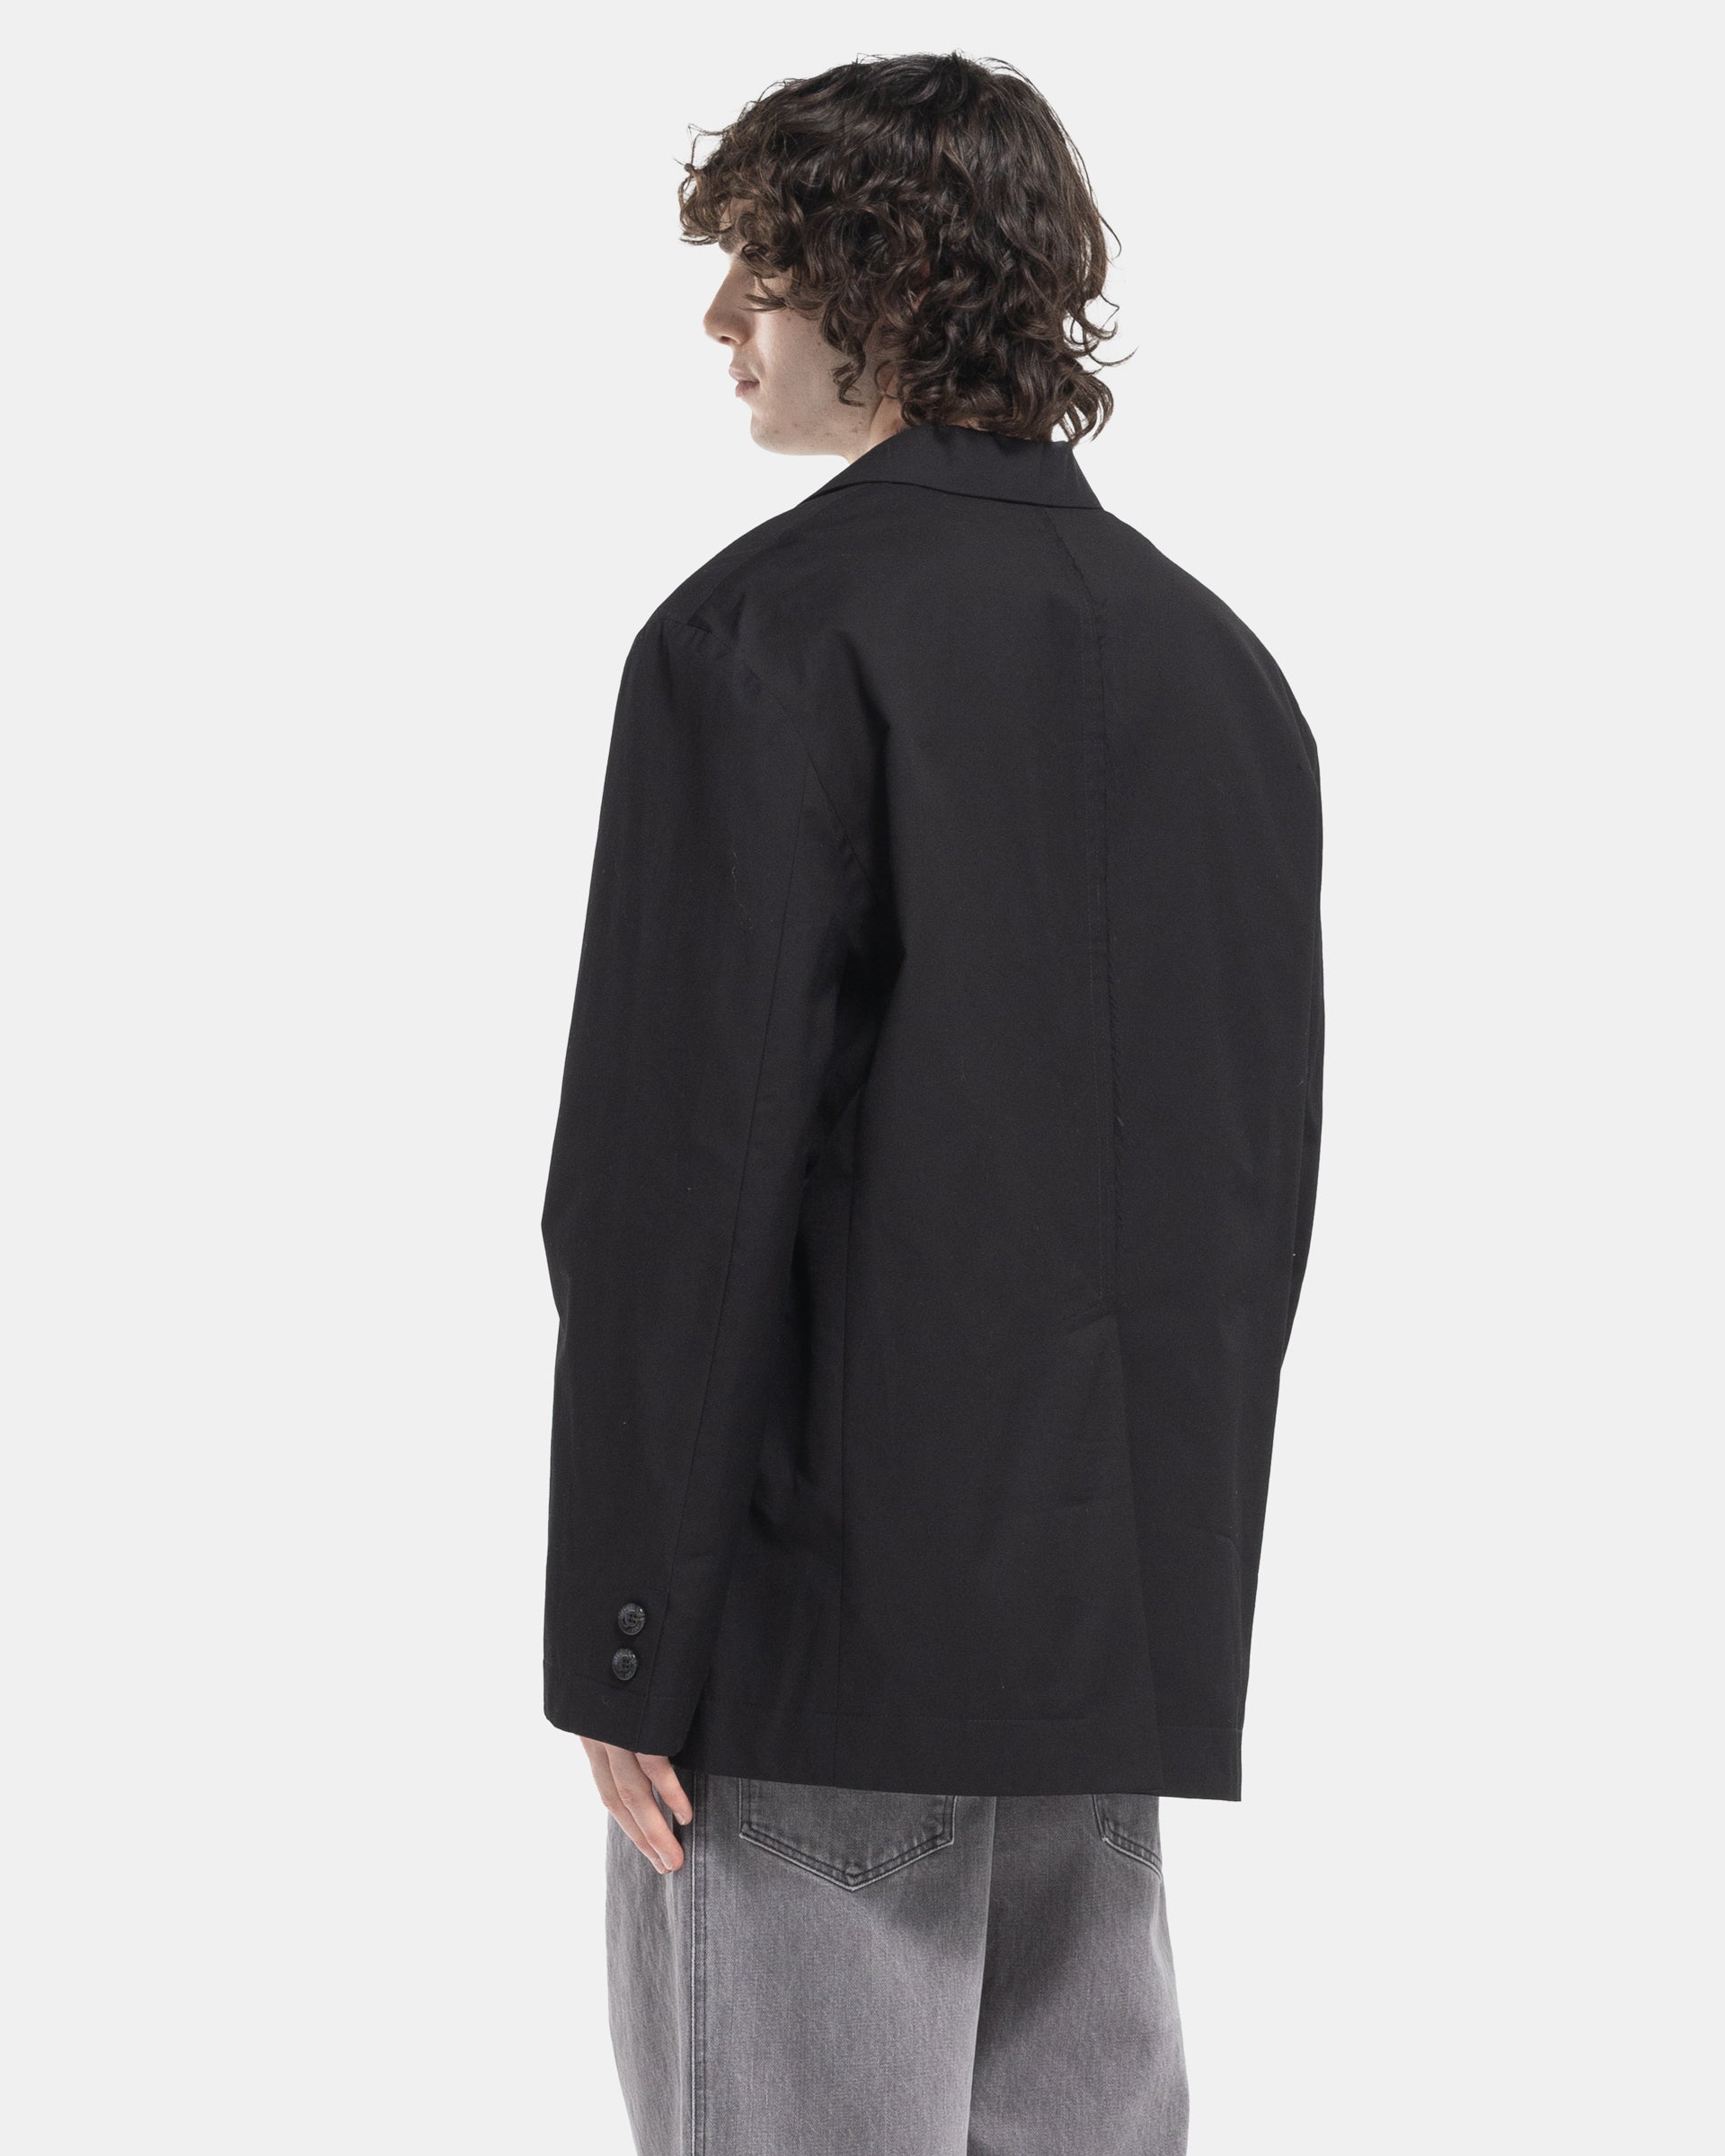 Song For The Mute Square Blazer in Black Back